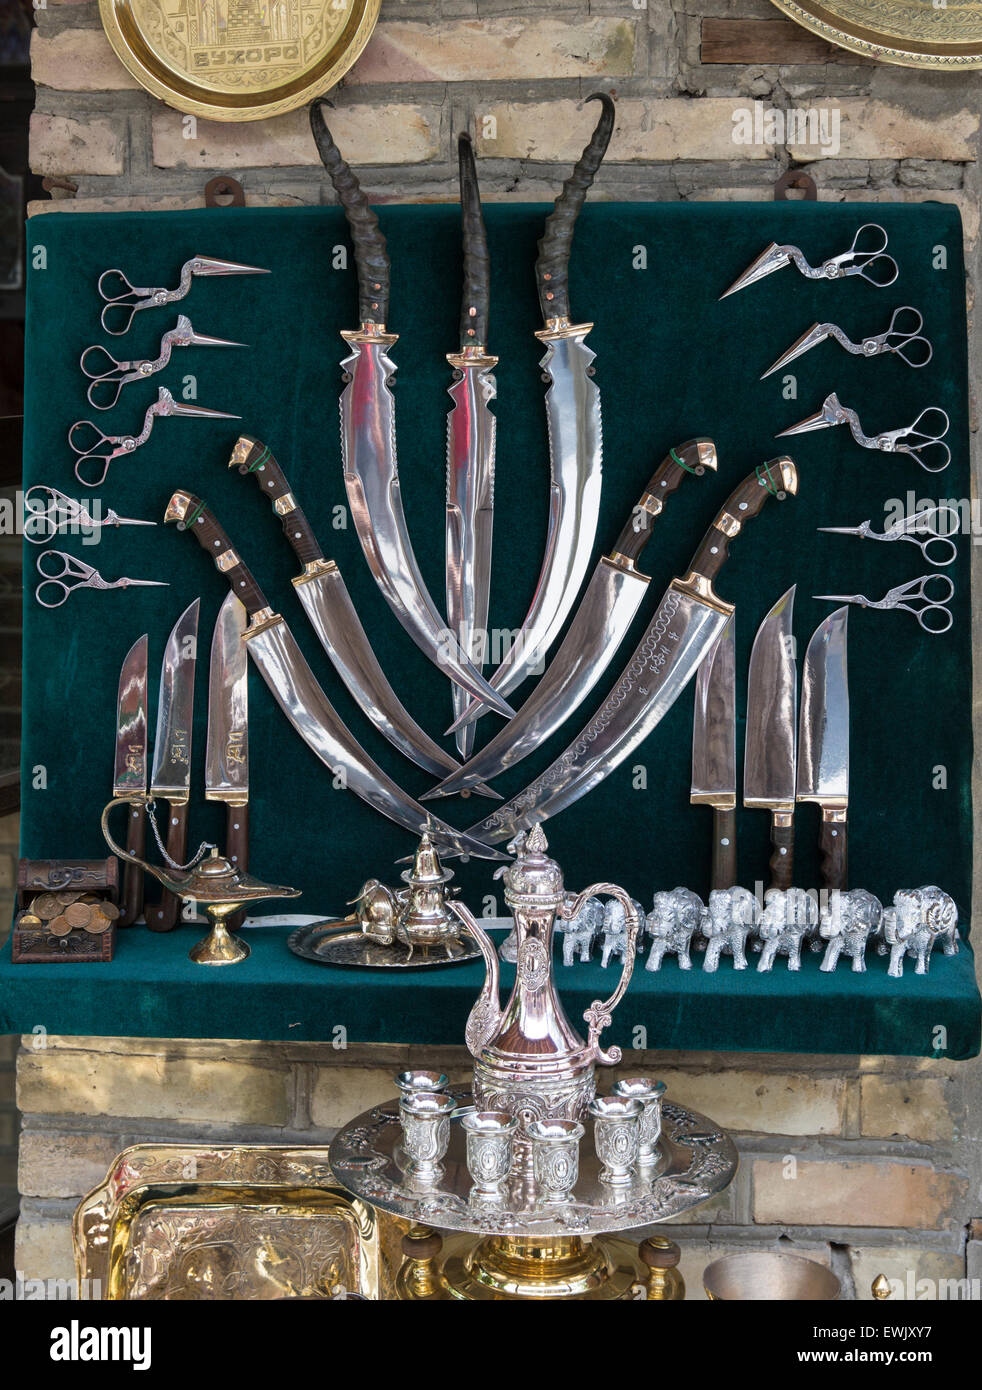 Knives and other objects at a metalsmith's shop in the ancient, walled Silk Road city of Bukhara, Uzbekistan Stock Photo